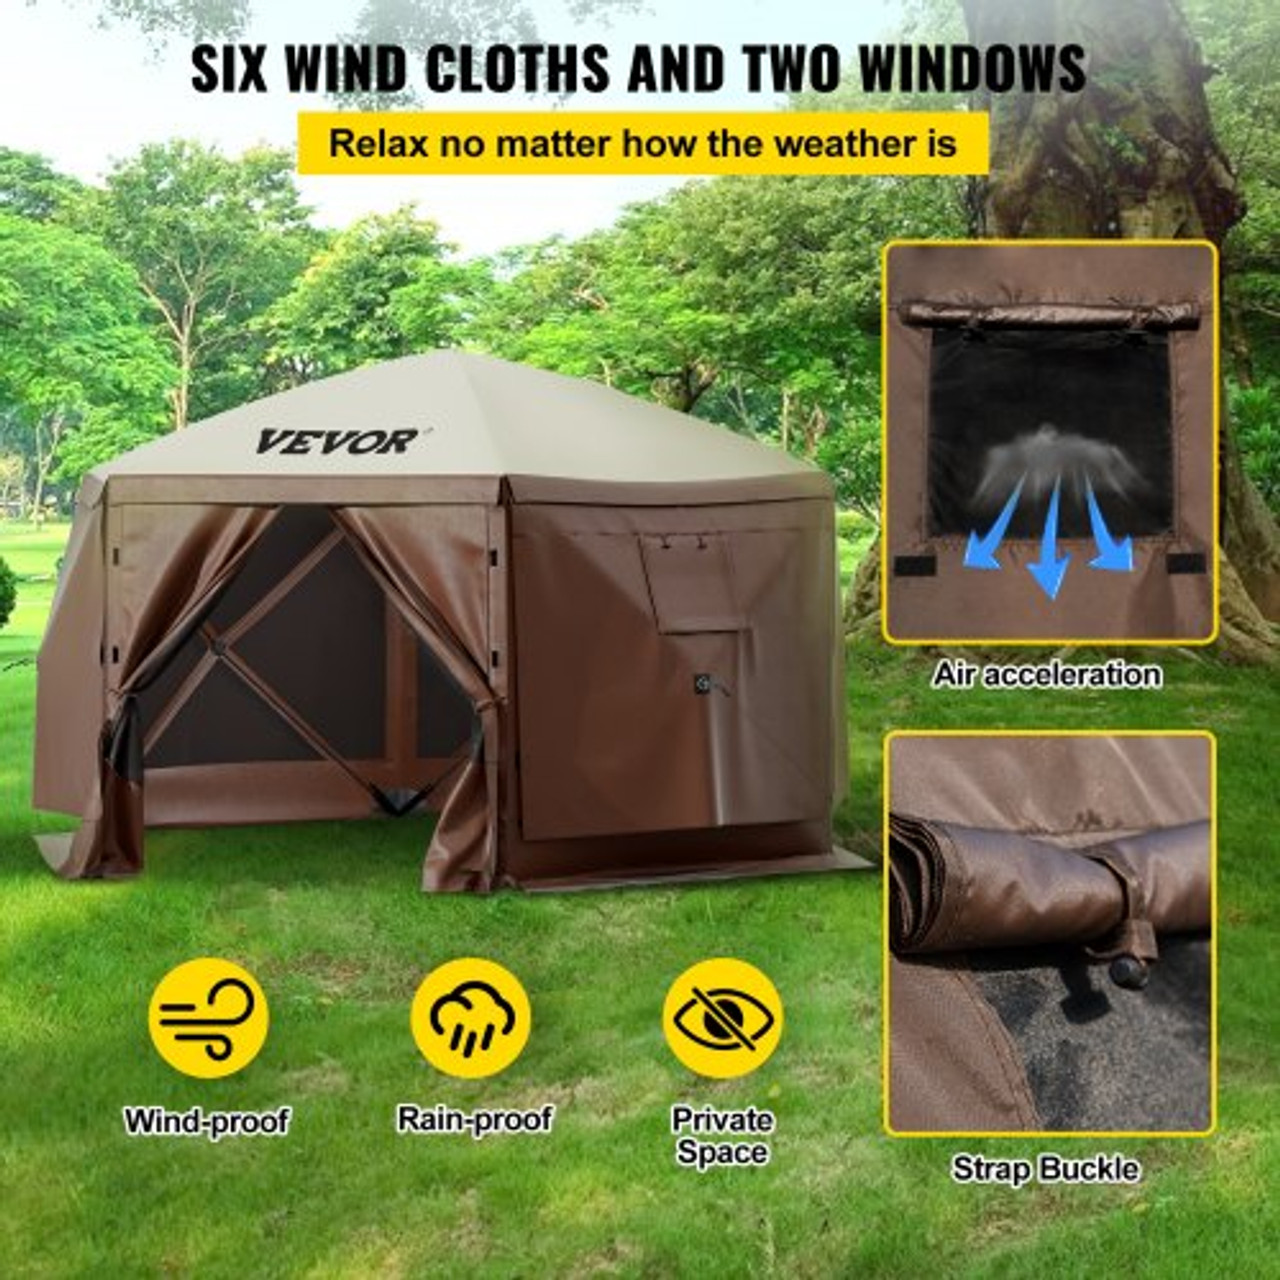 Camping Gazebo Tent, 10'x10', 6 Sided Pop-up Canopy Screen Tent for 8 Person Camping, Waterproof Screen Shelter w/Portable Storage Bag, Ground Stakes, Mesh Windows, Brown & Beige